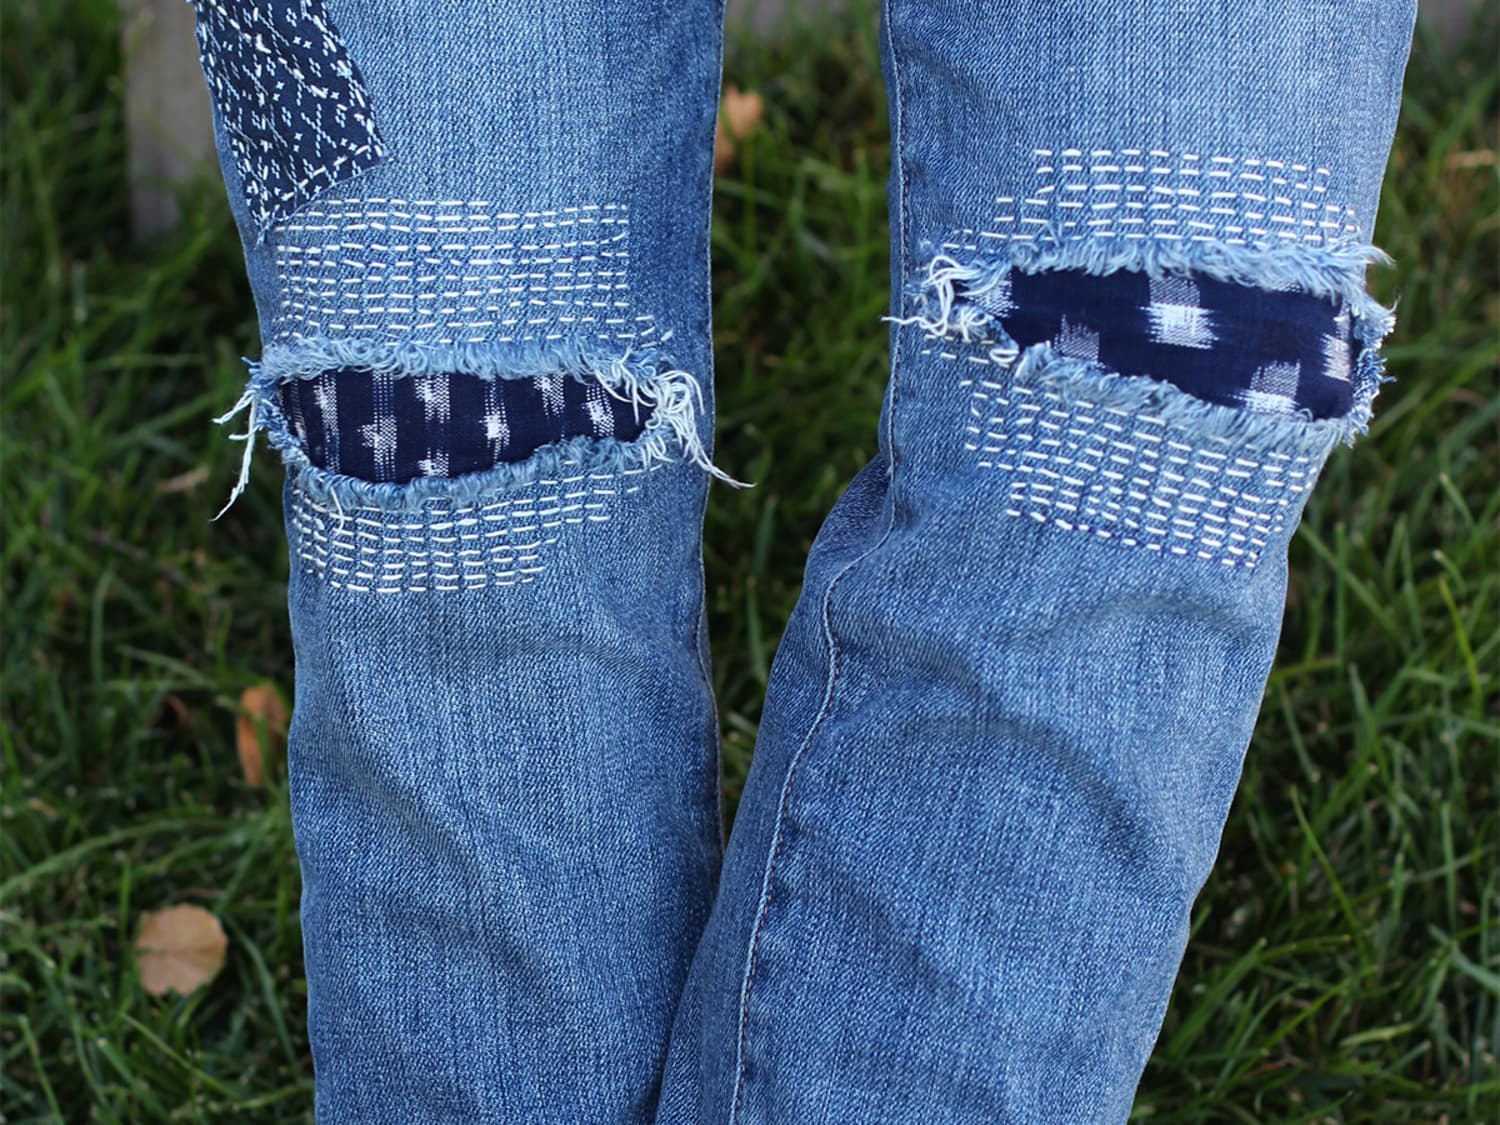 Sew a patch over holes - Fix a hole in clothing with patches - Mend tears  in clothes - Easy DIY 